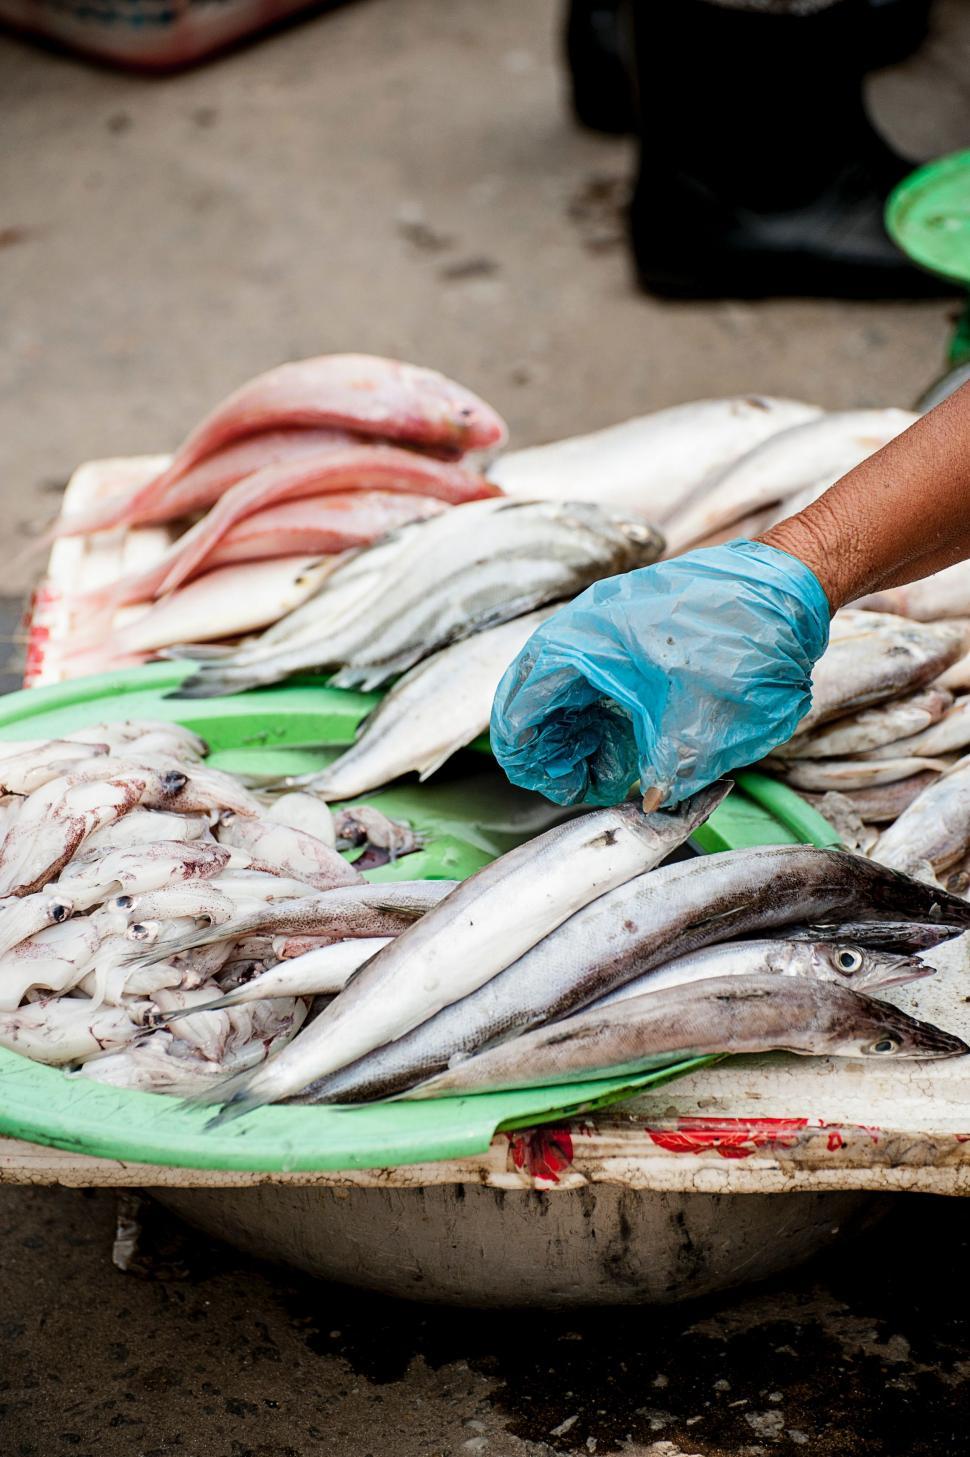 Free Image of Person Checking Fresh Fish on Tray With Blue Gloves 